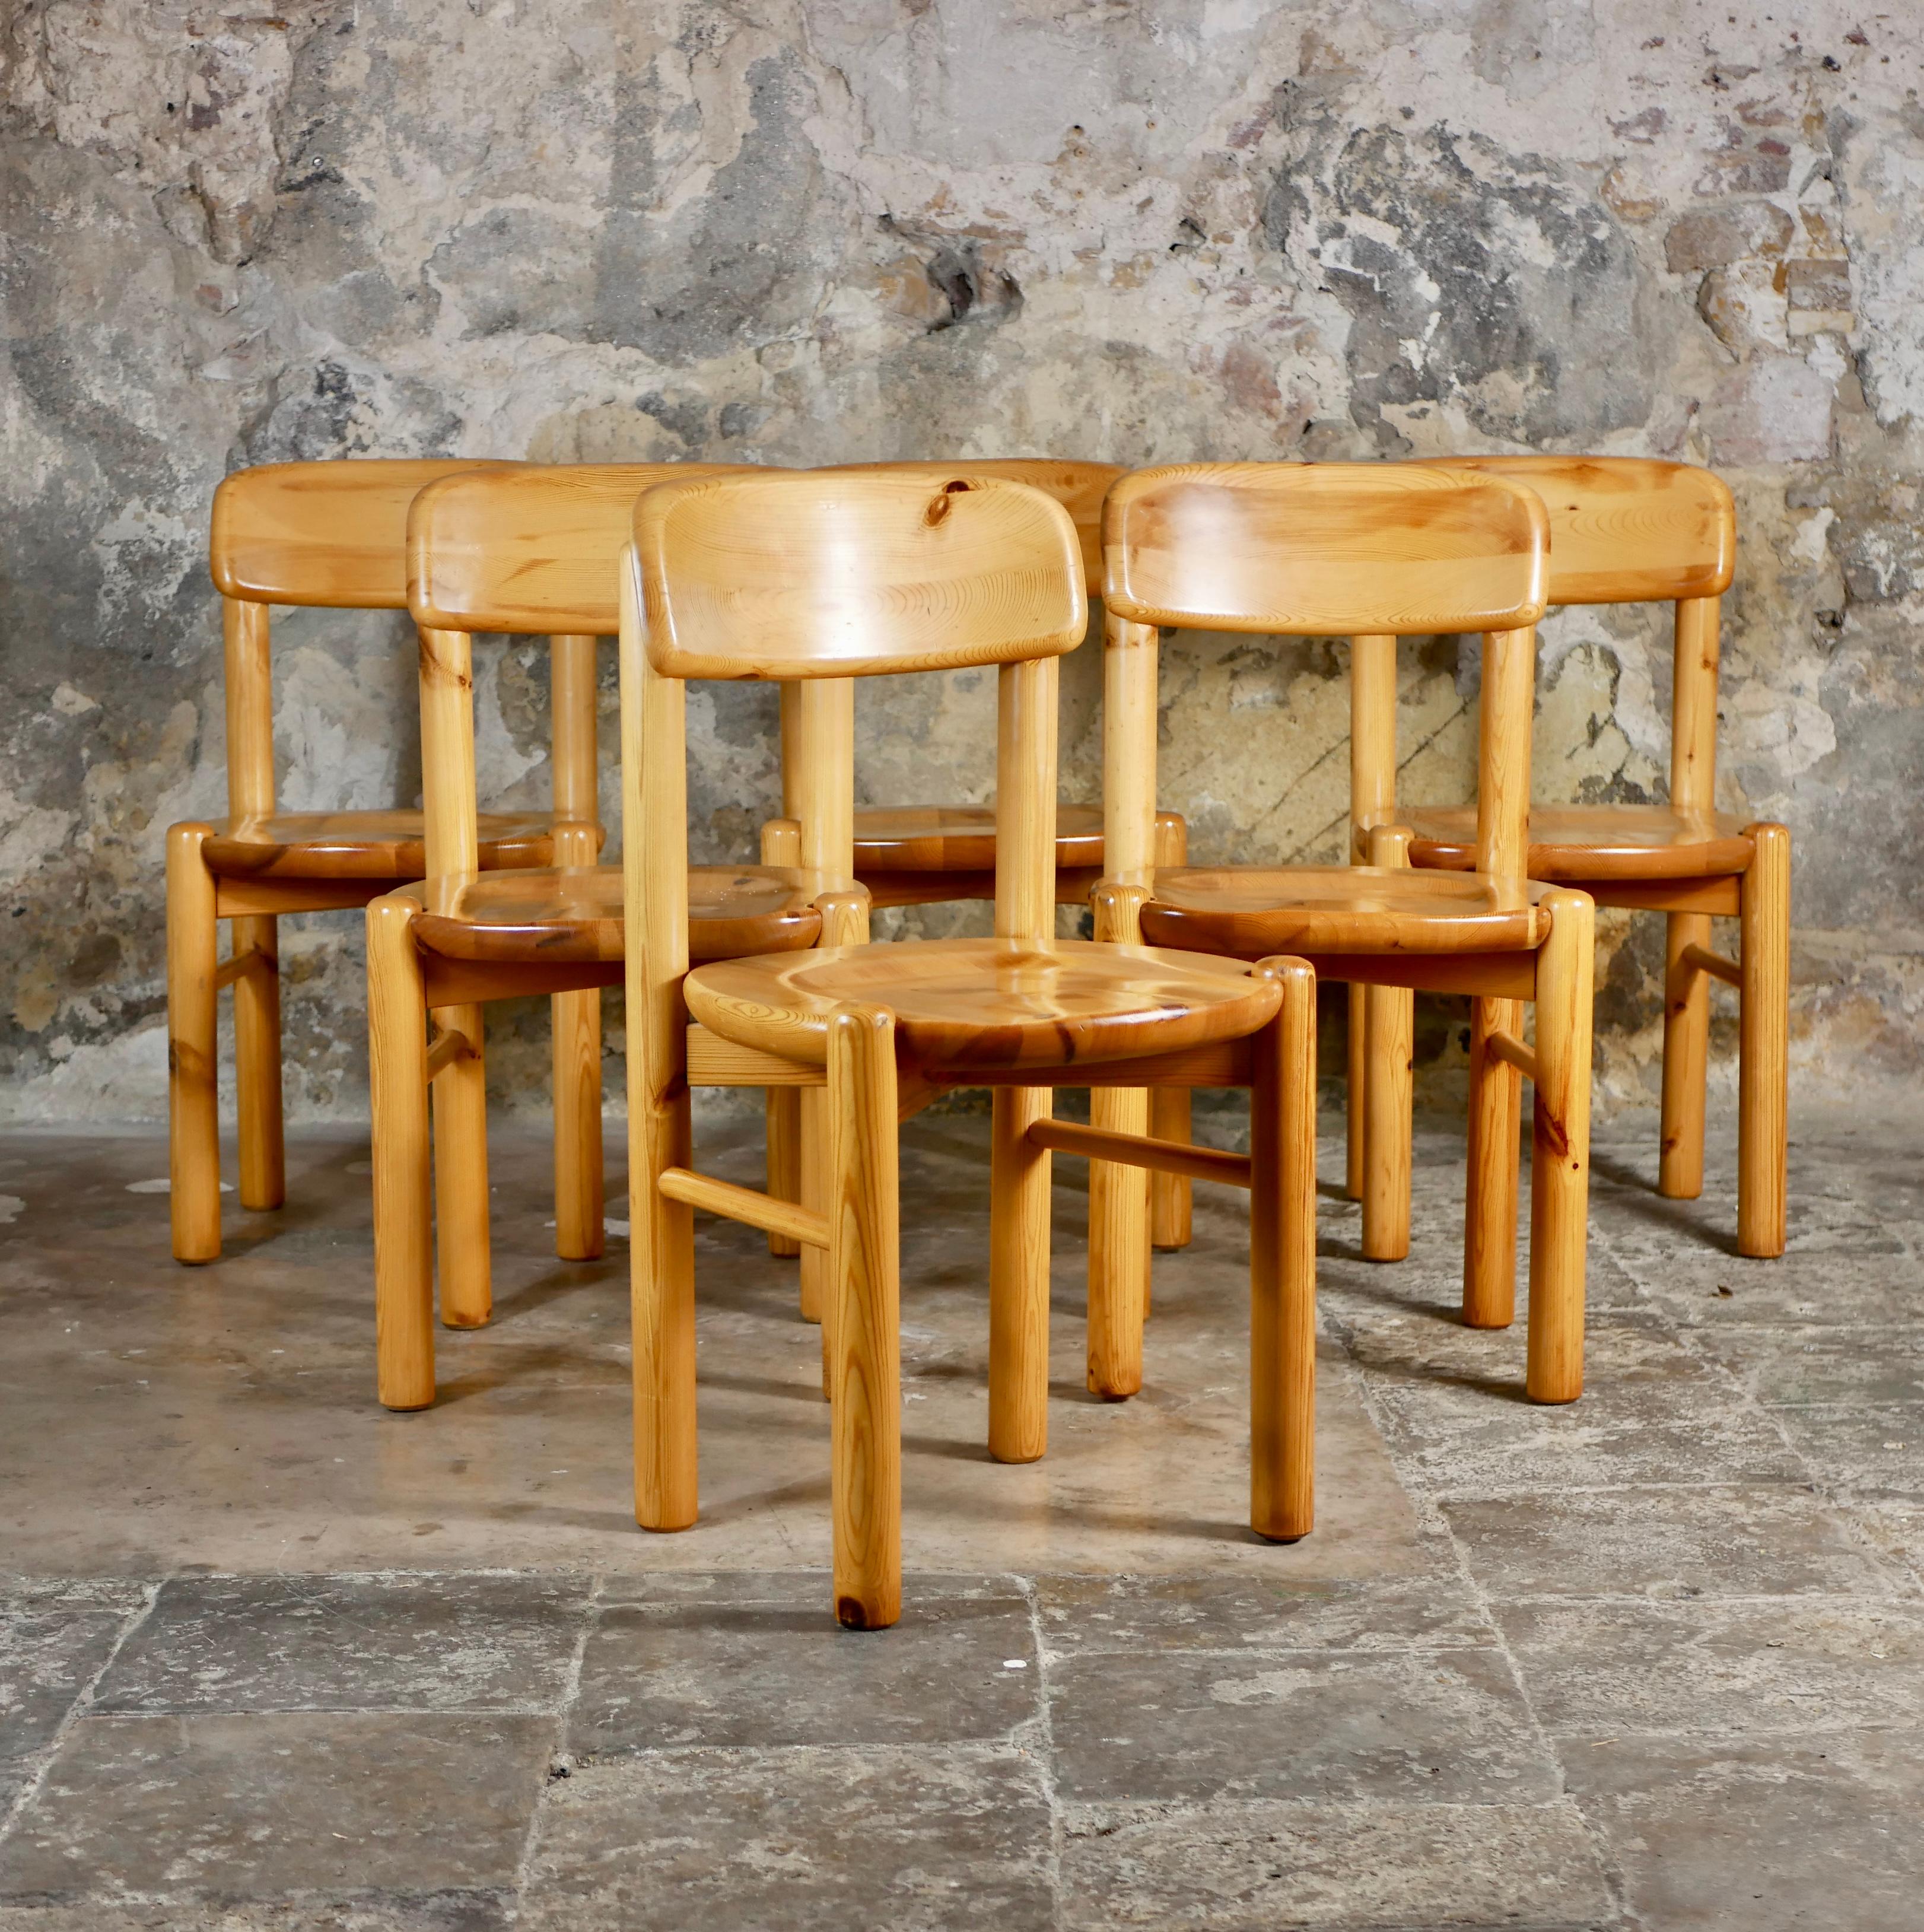 Beautiful set of 6 pinewood chairs designed by Rainer Daumiller in 1960s for Hirtshals Sawmill, made in Denmark.
Rounded lines, super sturdy, adorable, ones of our favorite chairs.
Good condition overal, traces of time.
Dimensions : H86cm, W46, D46